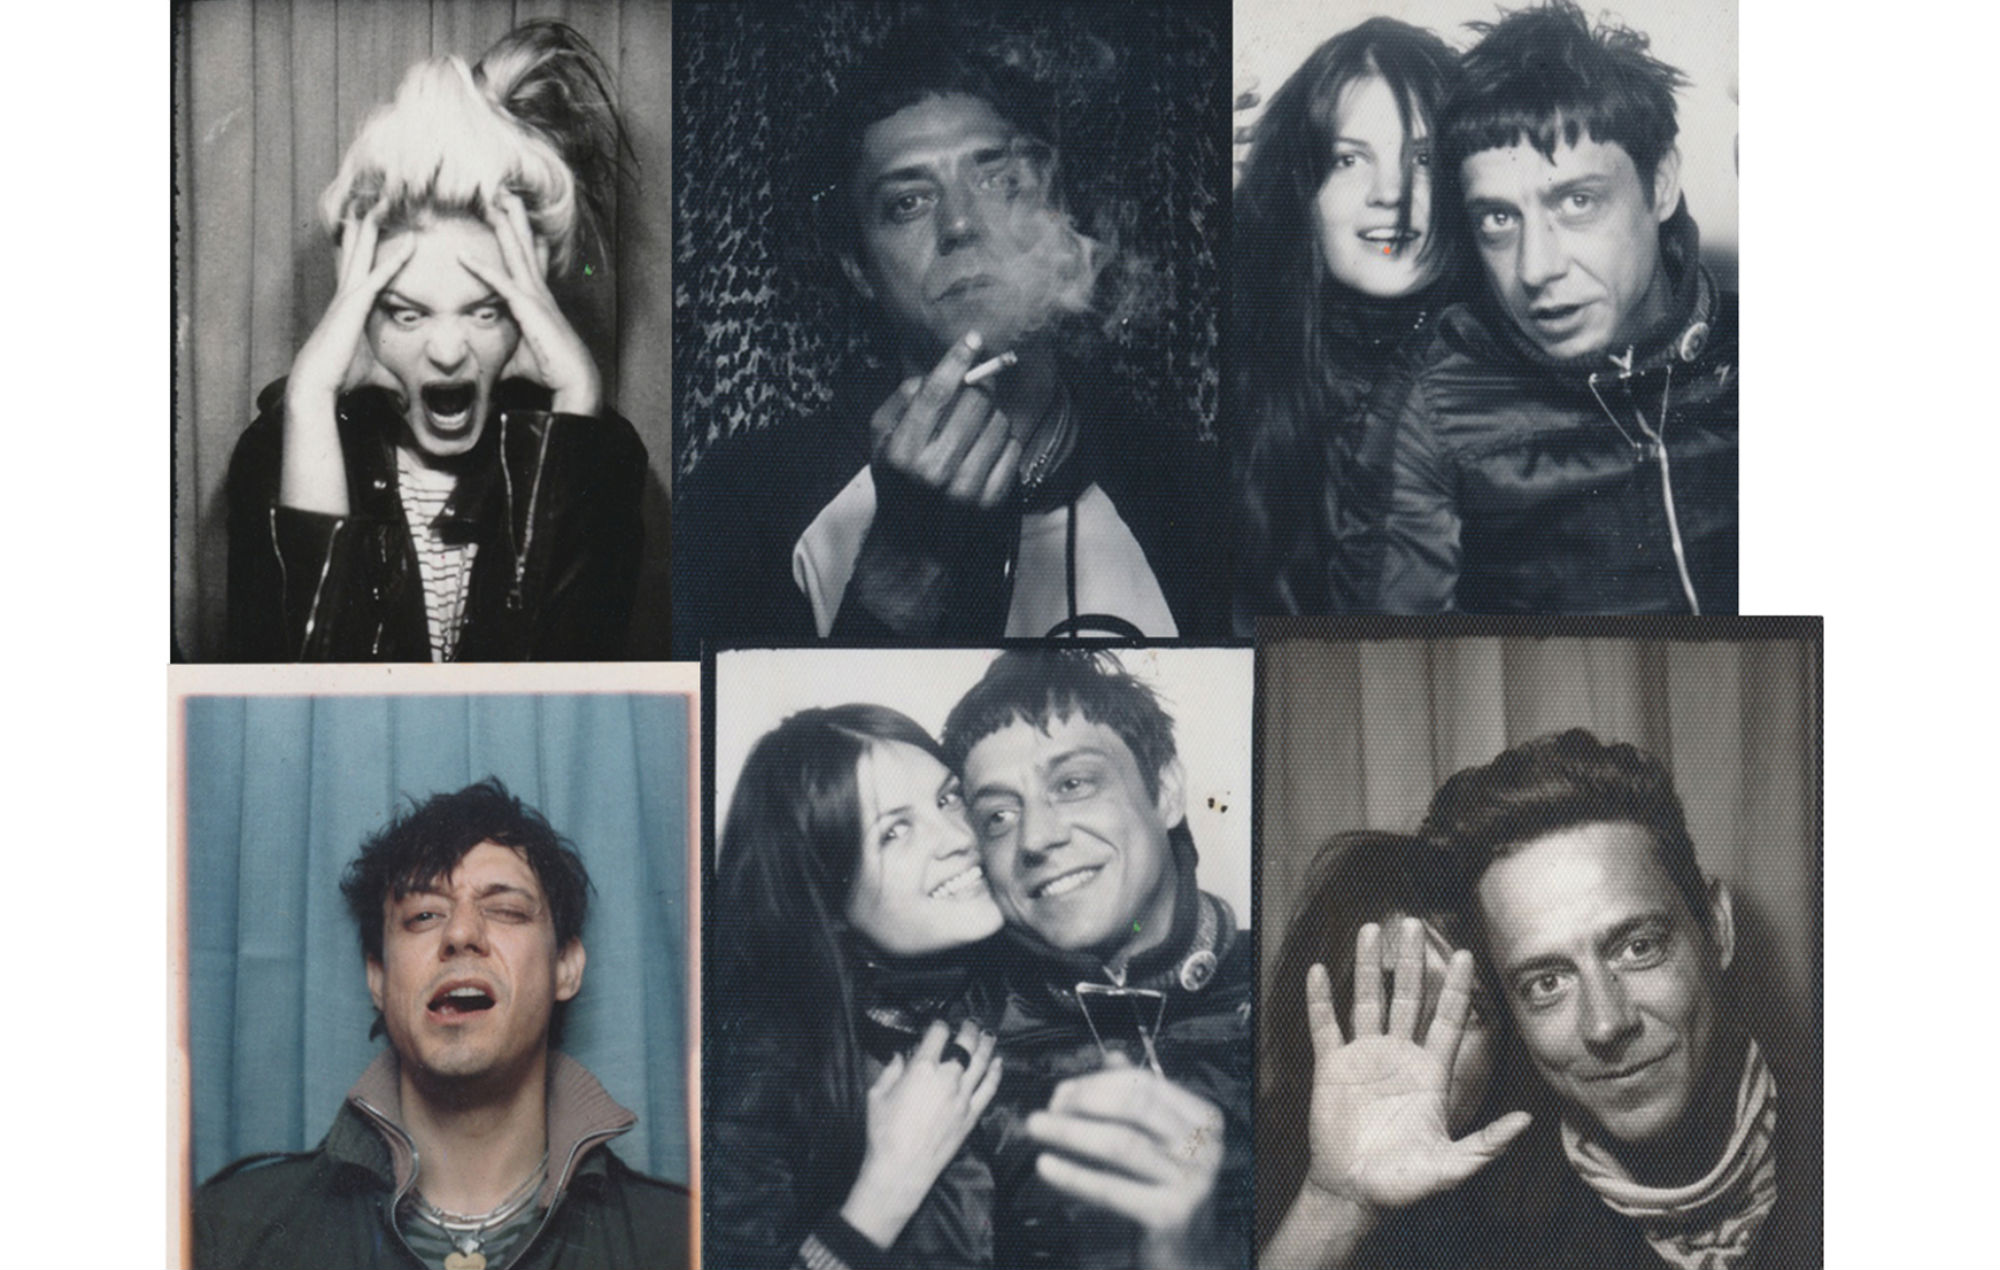 The Kills debut ‘Weed Killer’ video and tell us about B-sides and new music